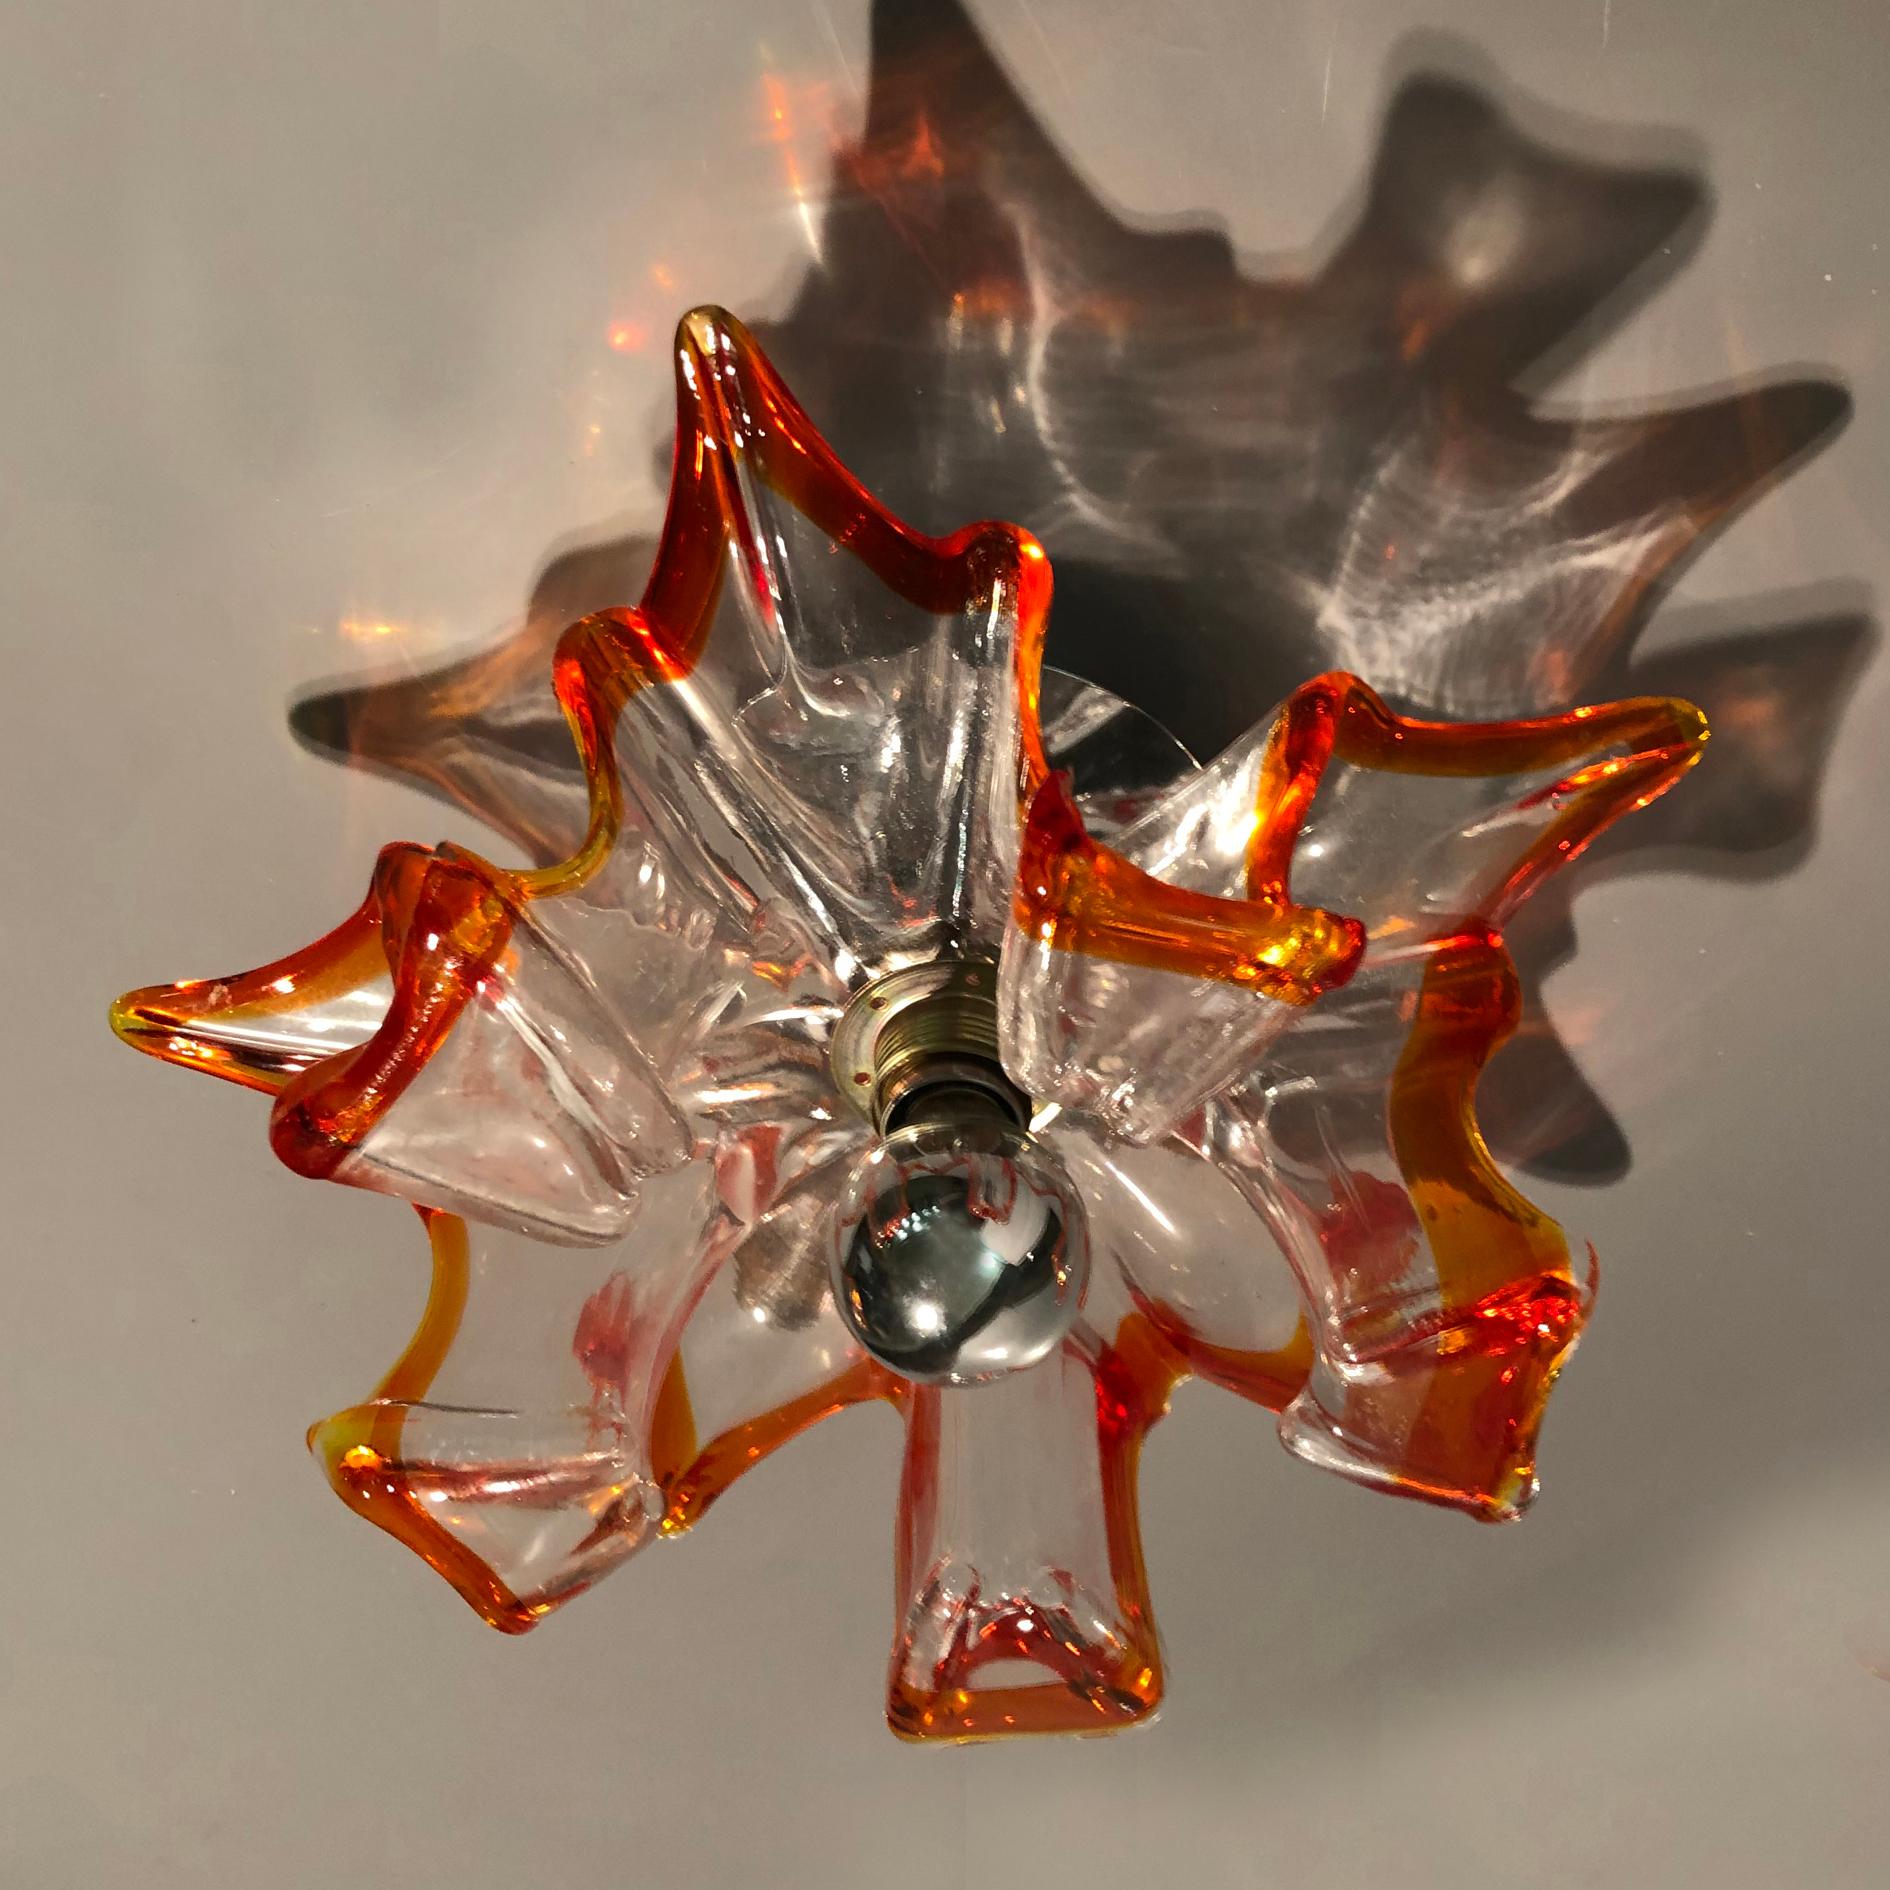 Vintage Italian wall lights or flushmount with hand blown clear Murano glasses with amber edge and mounted on metal base.
Shown with designer light bulb with silver tip detail, not included. E14 socket.
May be used as wall sconces or mounted to